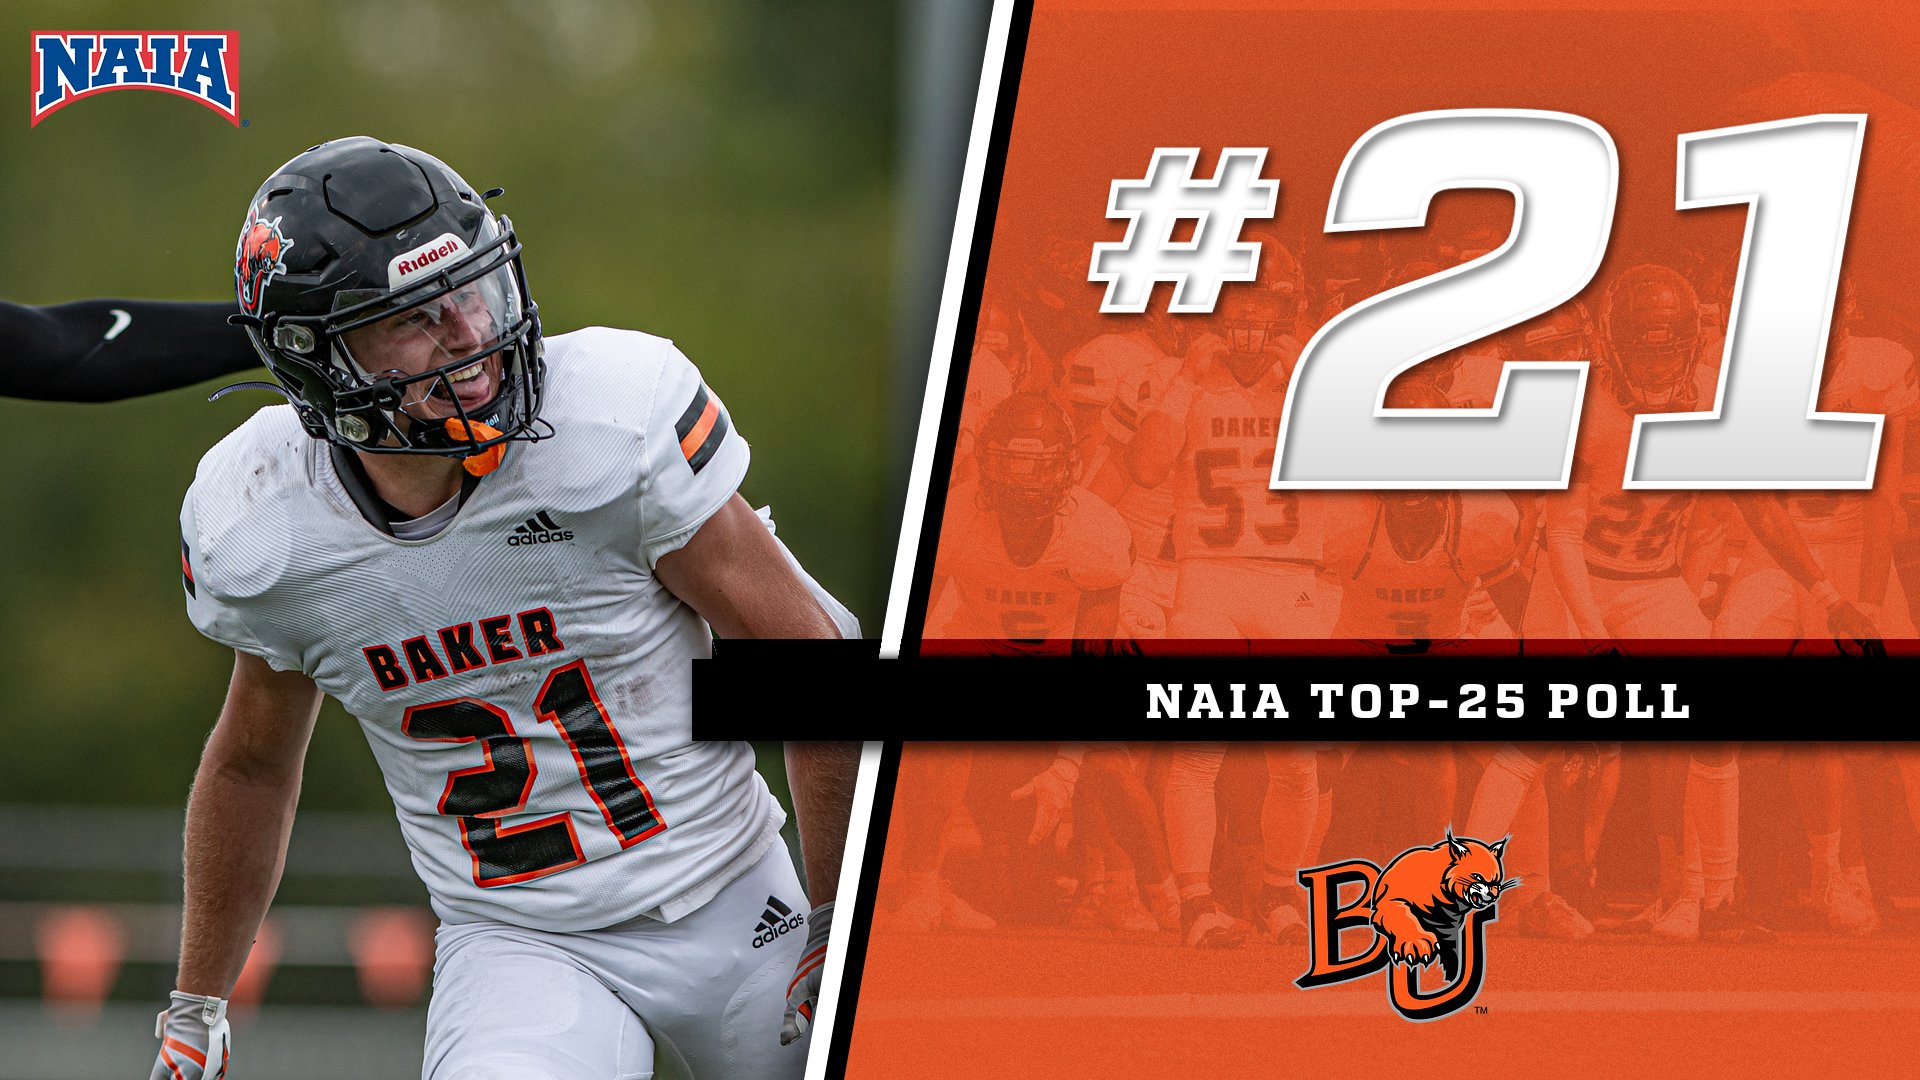 Wildcats Make Top-25 Debut, Rank No. 21 in Latest NAIA Poll